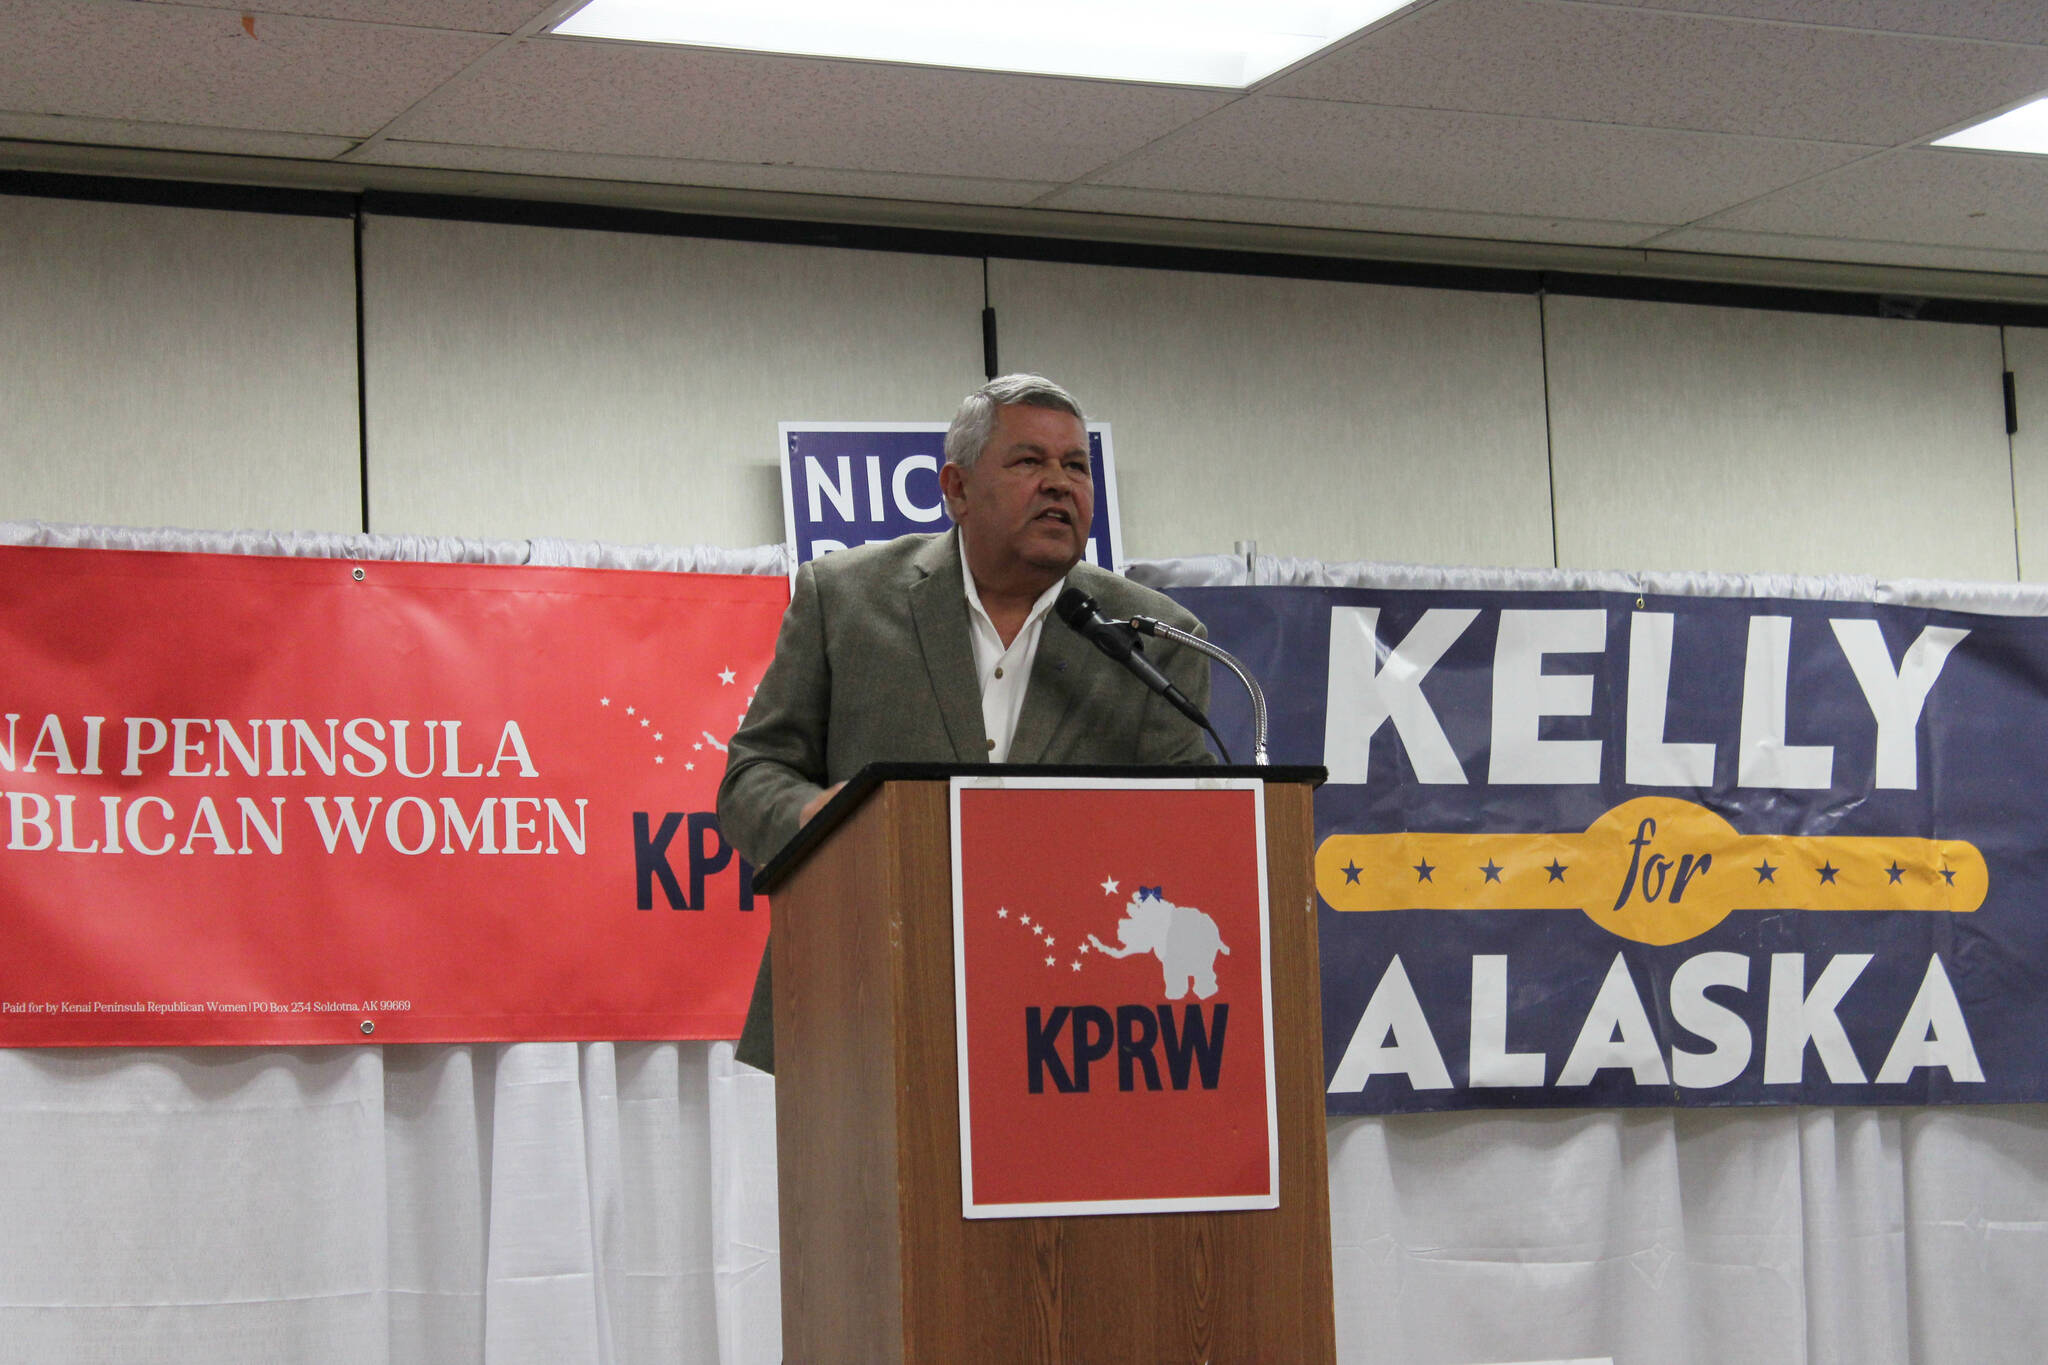 Former Kenai Peninsula Borough Mayor and current Alaska gubernatorial candidate Charlie Pierce speaks at a “Get Out the Vote” rally hosted by the Kenai Peninsula Republican Women at the Soldotna Regional Sports Complex on Tuesday, Oct. 18, 2022 in Soldotna, Alaska. (Ashlyn O’Hara/Peninsula Clarion)